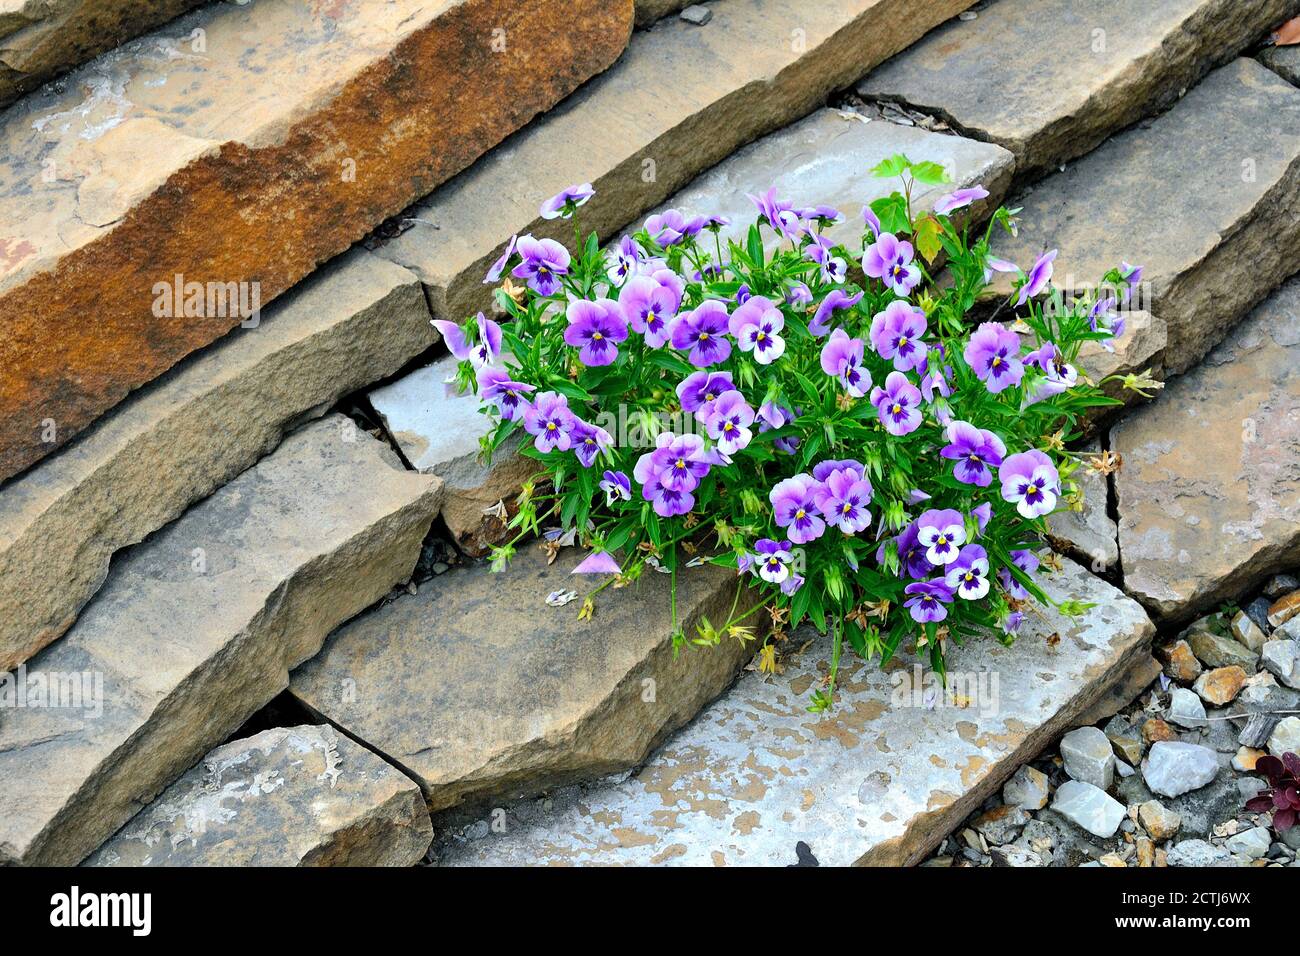 Closeup of colorful pansy flowers in the garden. Scientific name of garden pansies is Viola wittrockiana. Ornamental hybrid plant blooming on stone st Stock Photo